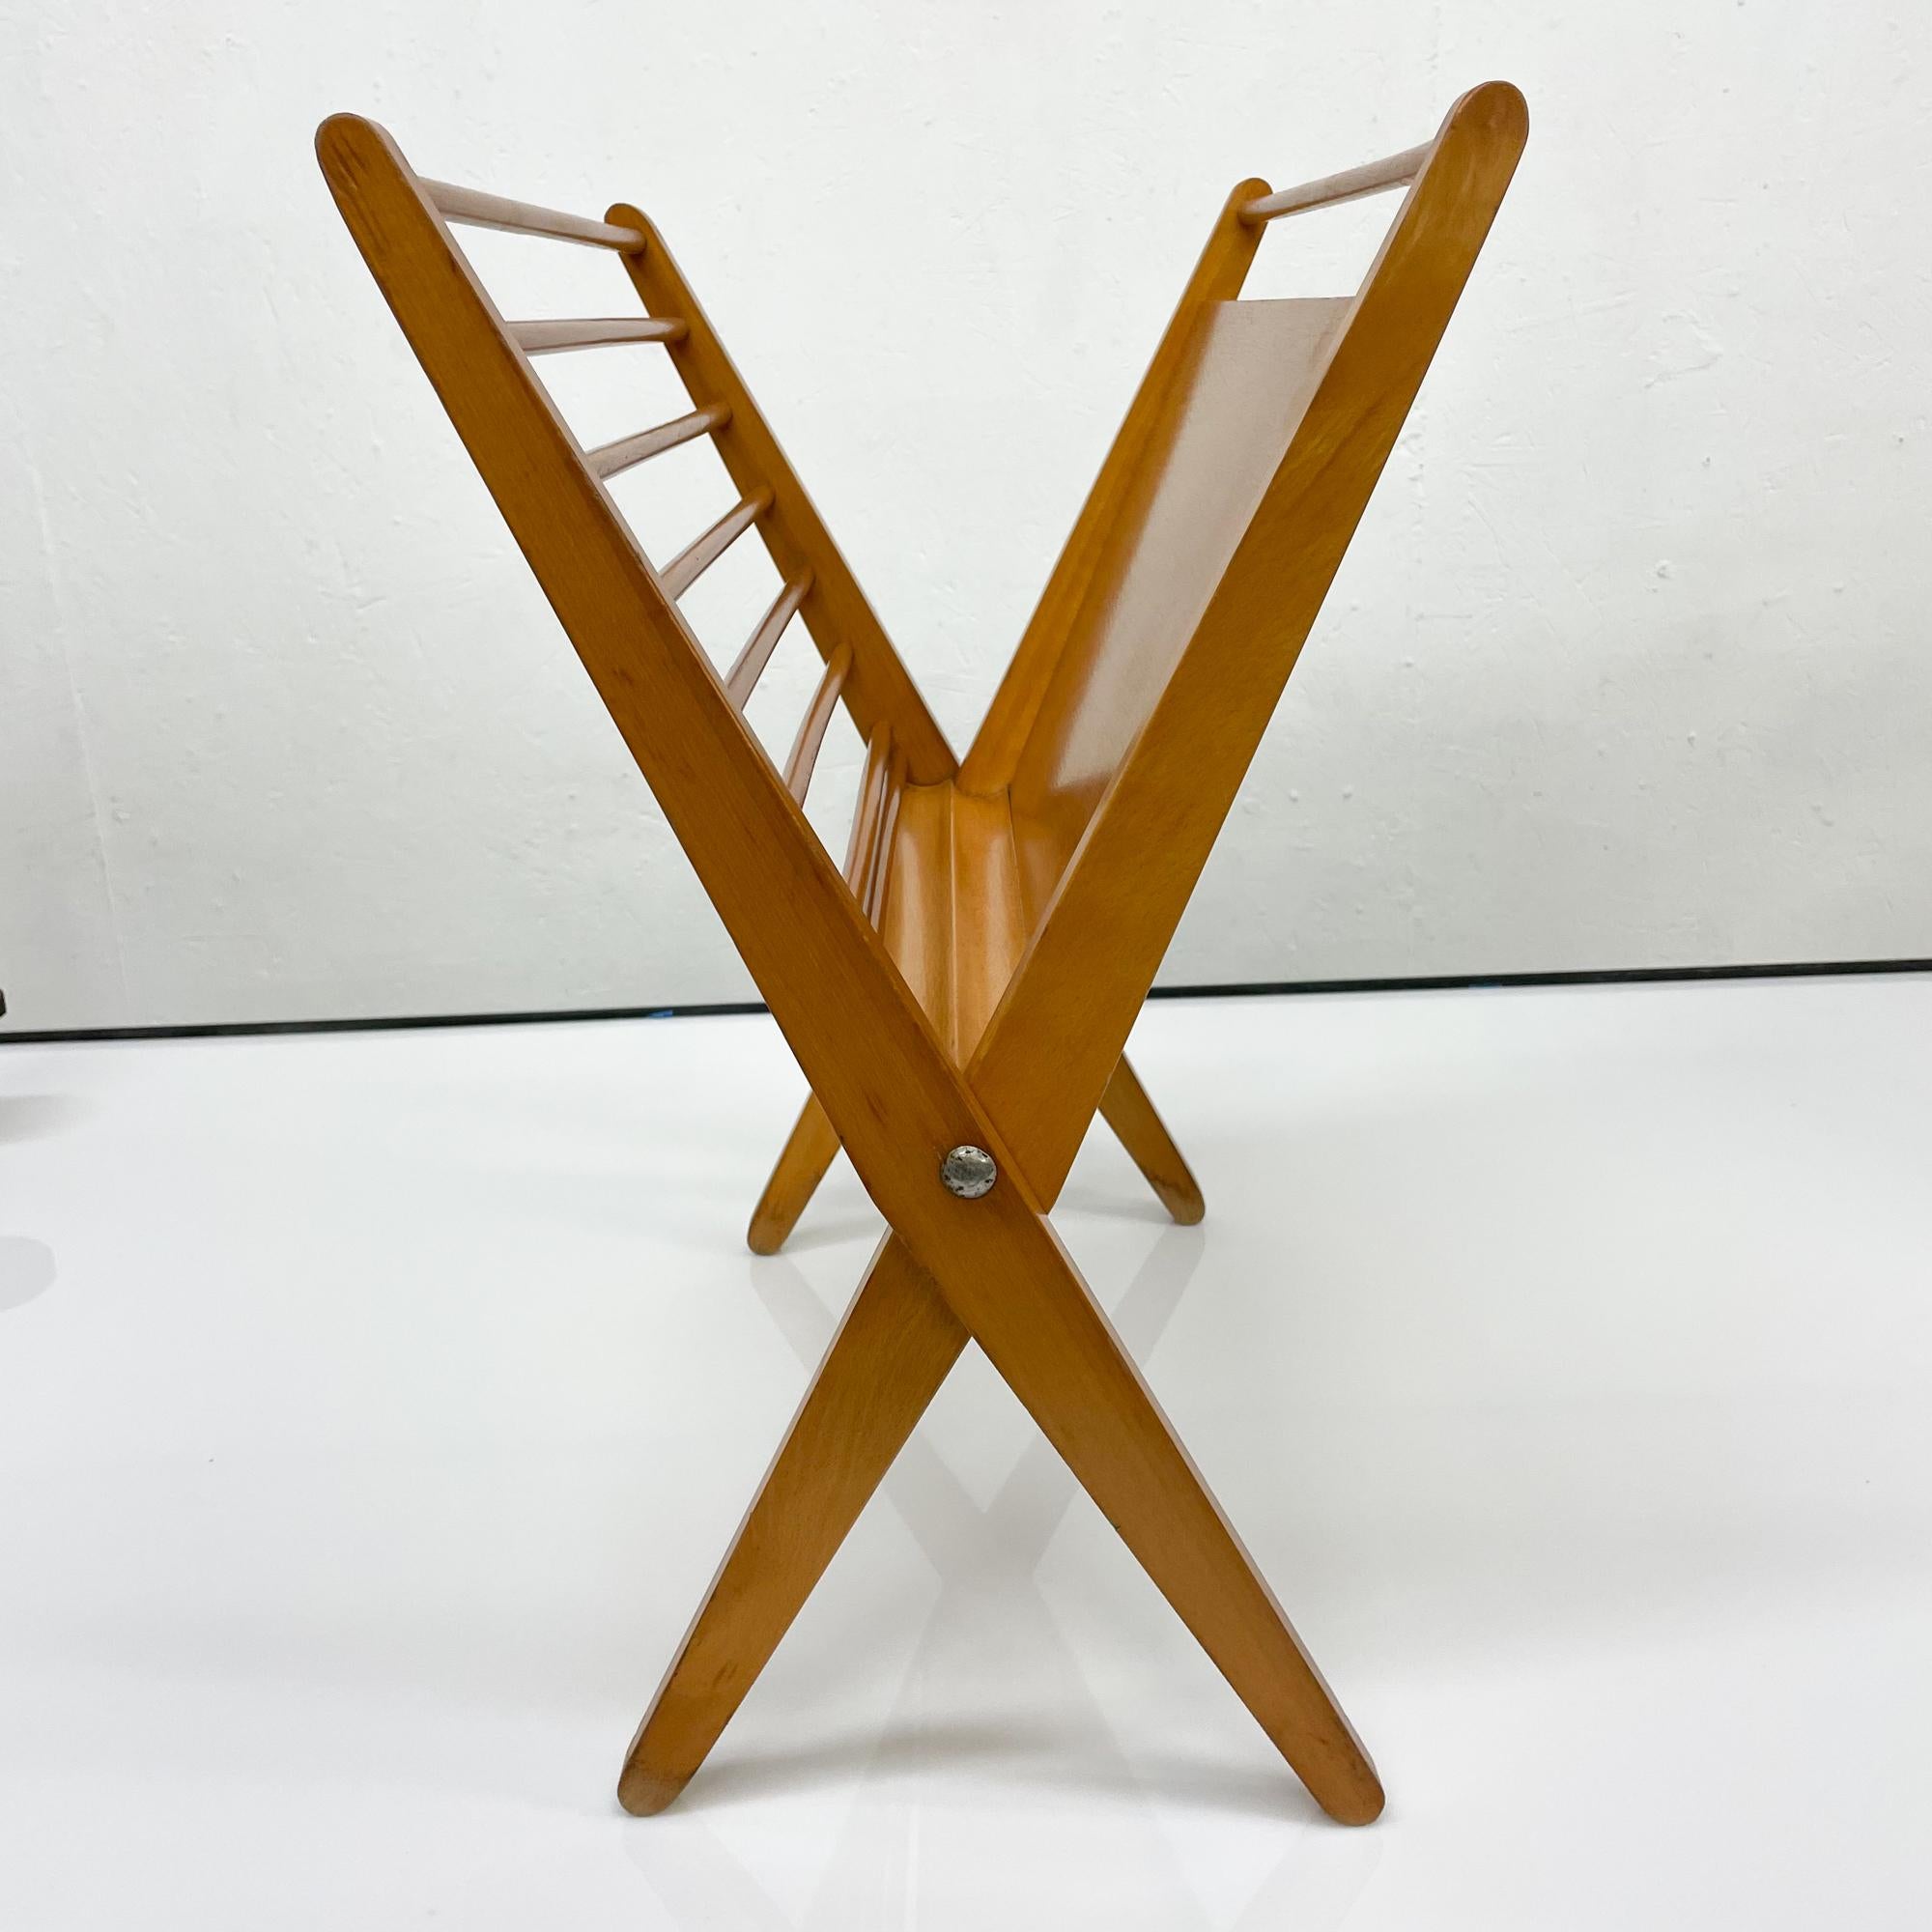 Folding Magazine Rack
a midcentury modern magazine rack or magazine holder with clean modern lines.
Made in Yugoslavia
blonde wood.
Modern design. It is foldable. Great feature for easy shipping.
Very good vintage unrestored condition. Very clean.